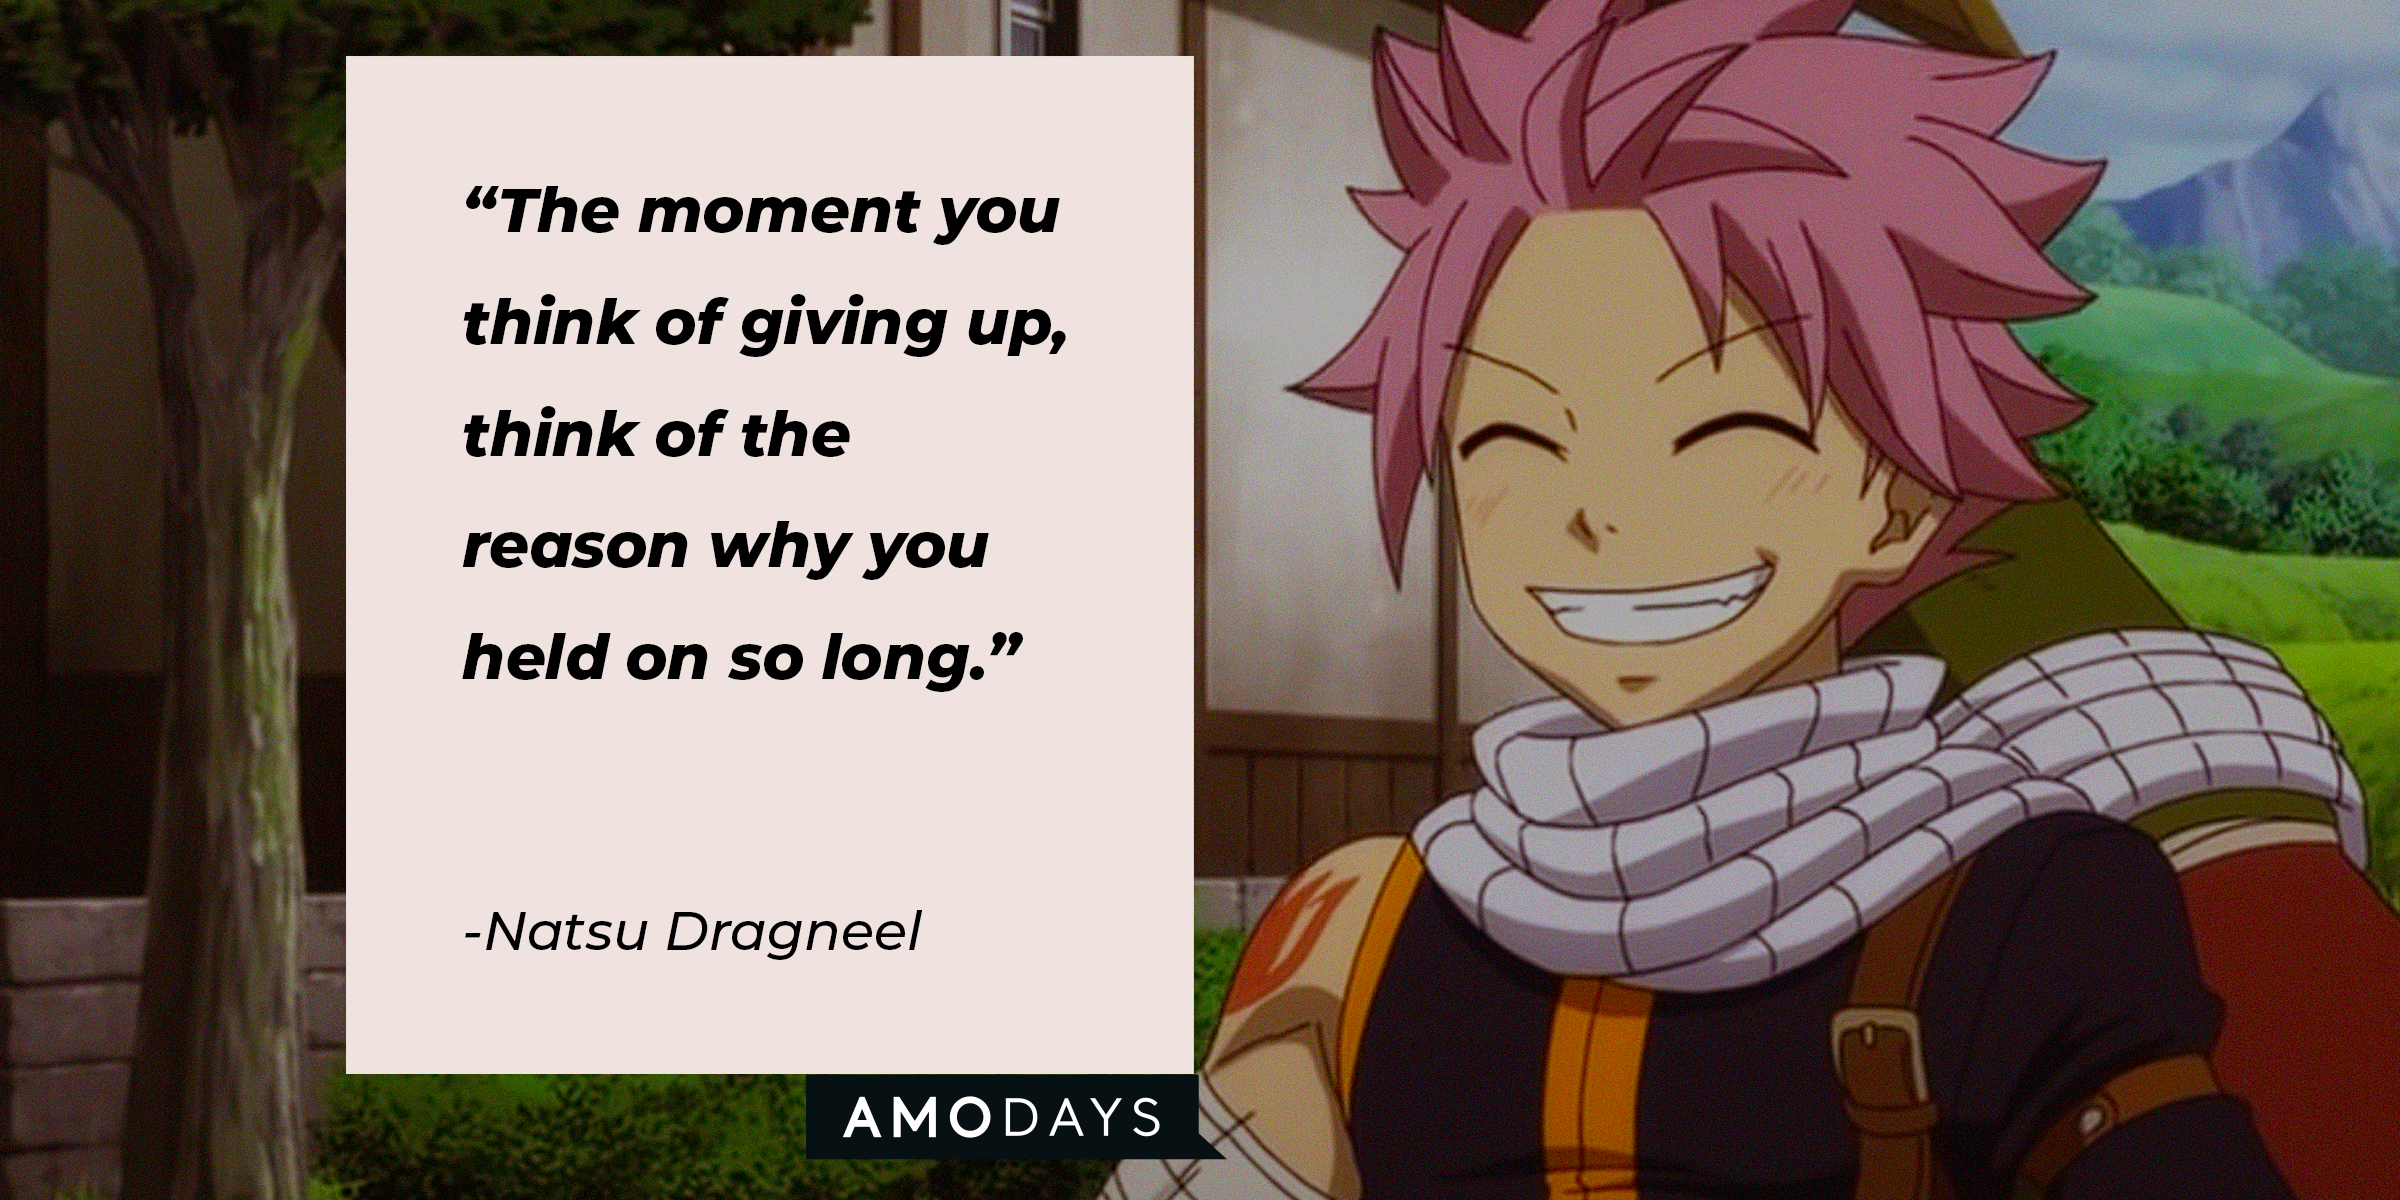 A photo of Natsu Dragneel with thee quote, "The moment you think of giving up, think of the reason why you held on so long." | Source: Youtube/CrunchyrollCollection